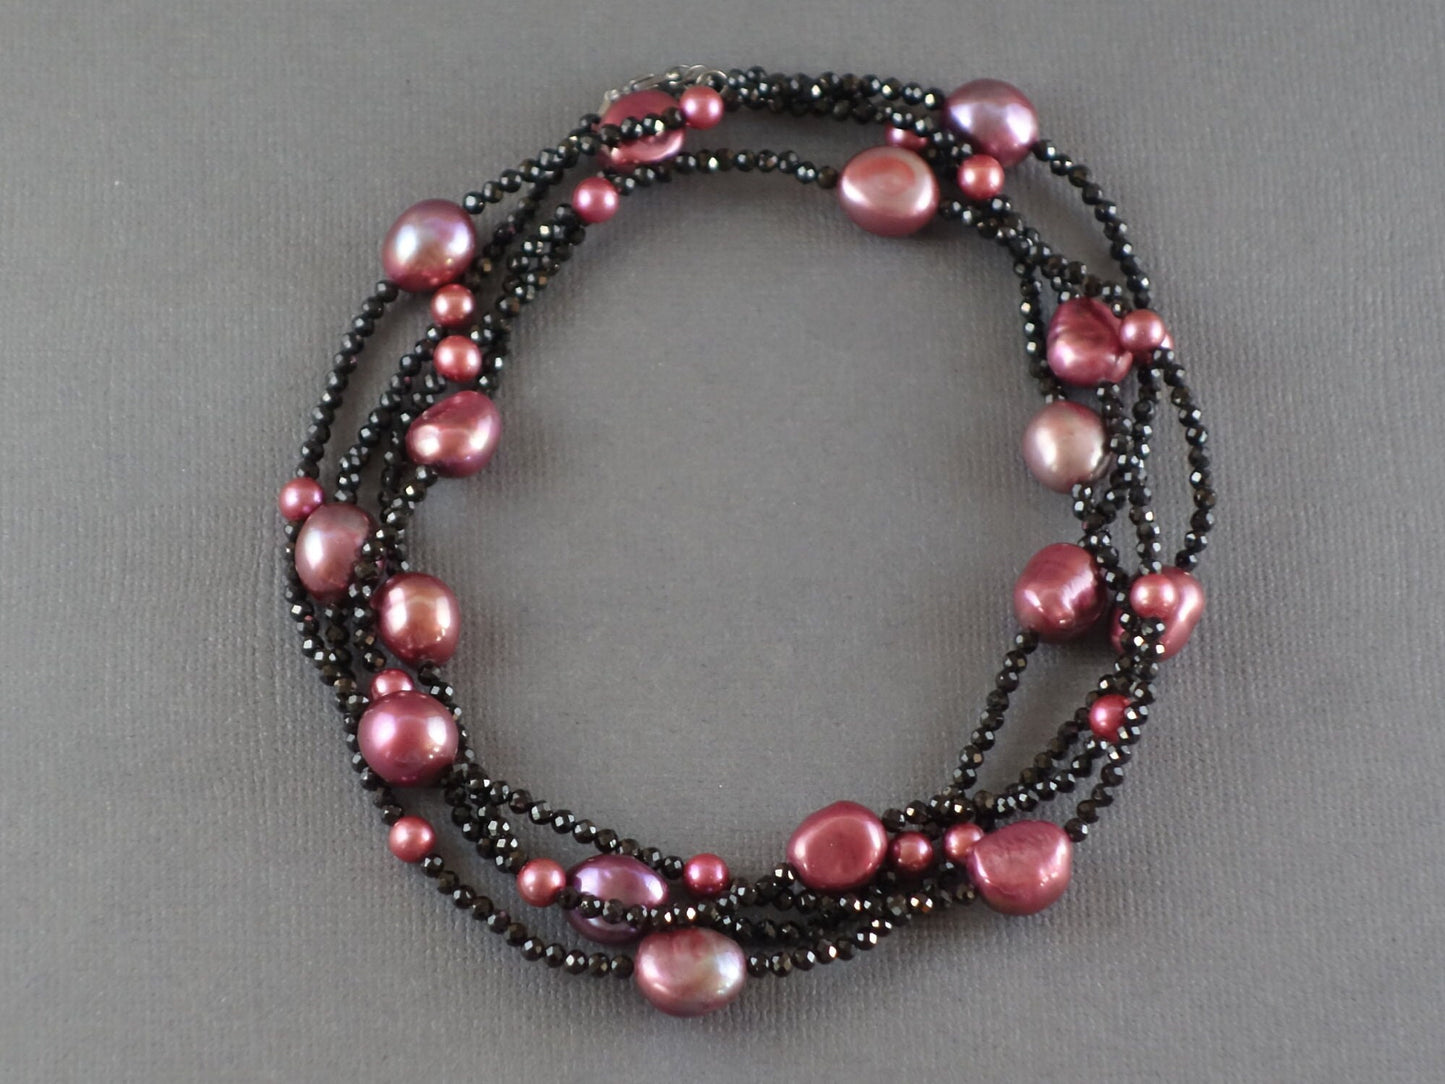 Long Pearl Necklace, Pink Pearl Necklace, Black Spinel Necklace, 48 inch Pearl Necklace,